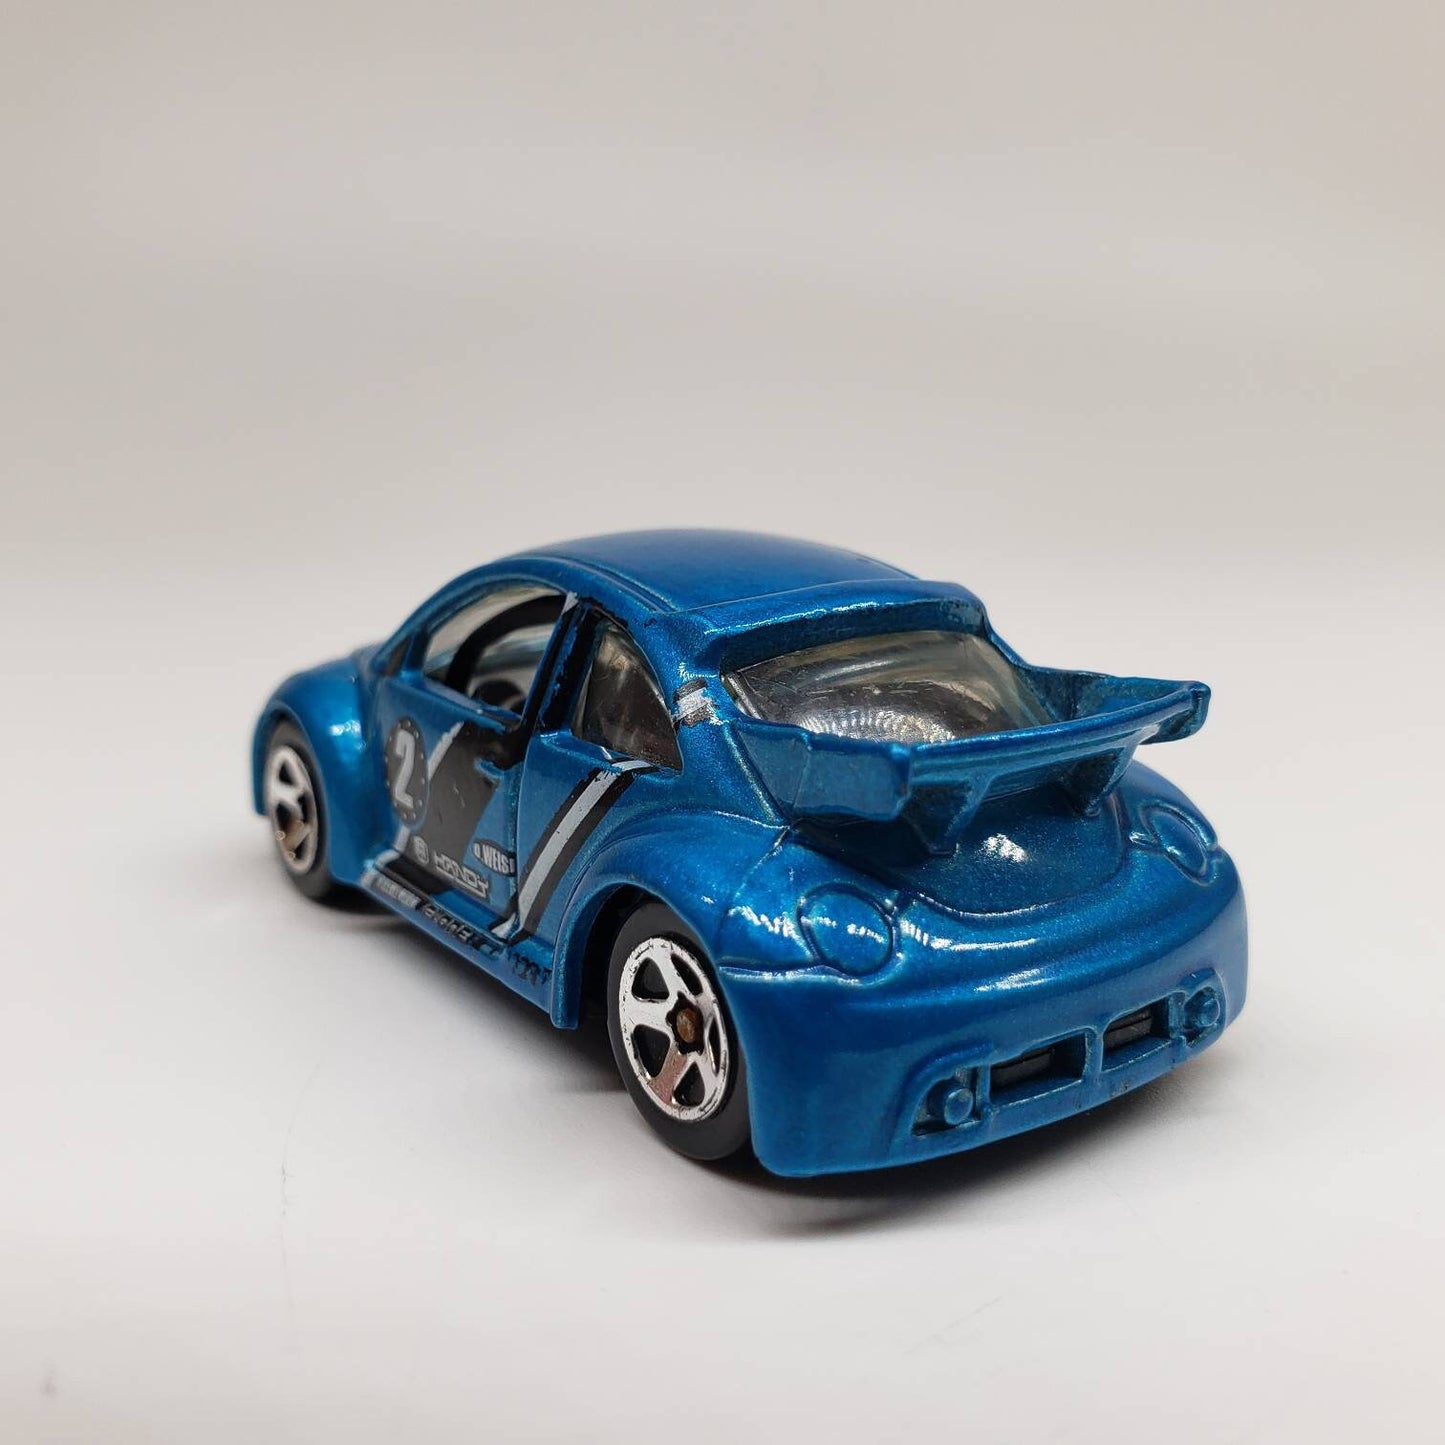 Hot Wheels Volkswagen New Beetle Cup Metalflake Blue Mainline Perfect Birthday Gift Miniature Collectable Scale Model Toy Car